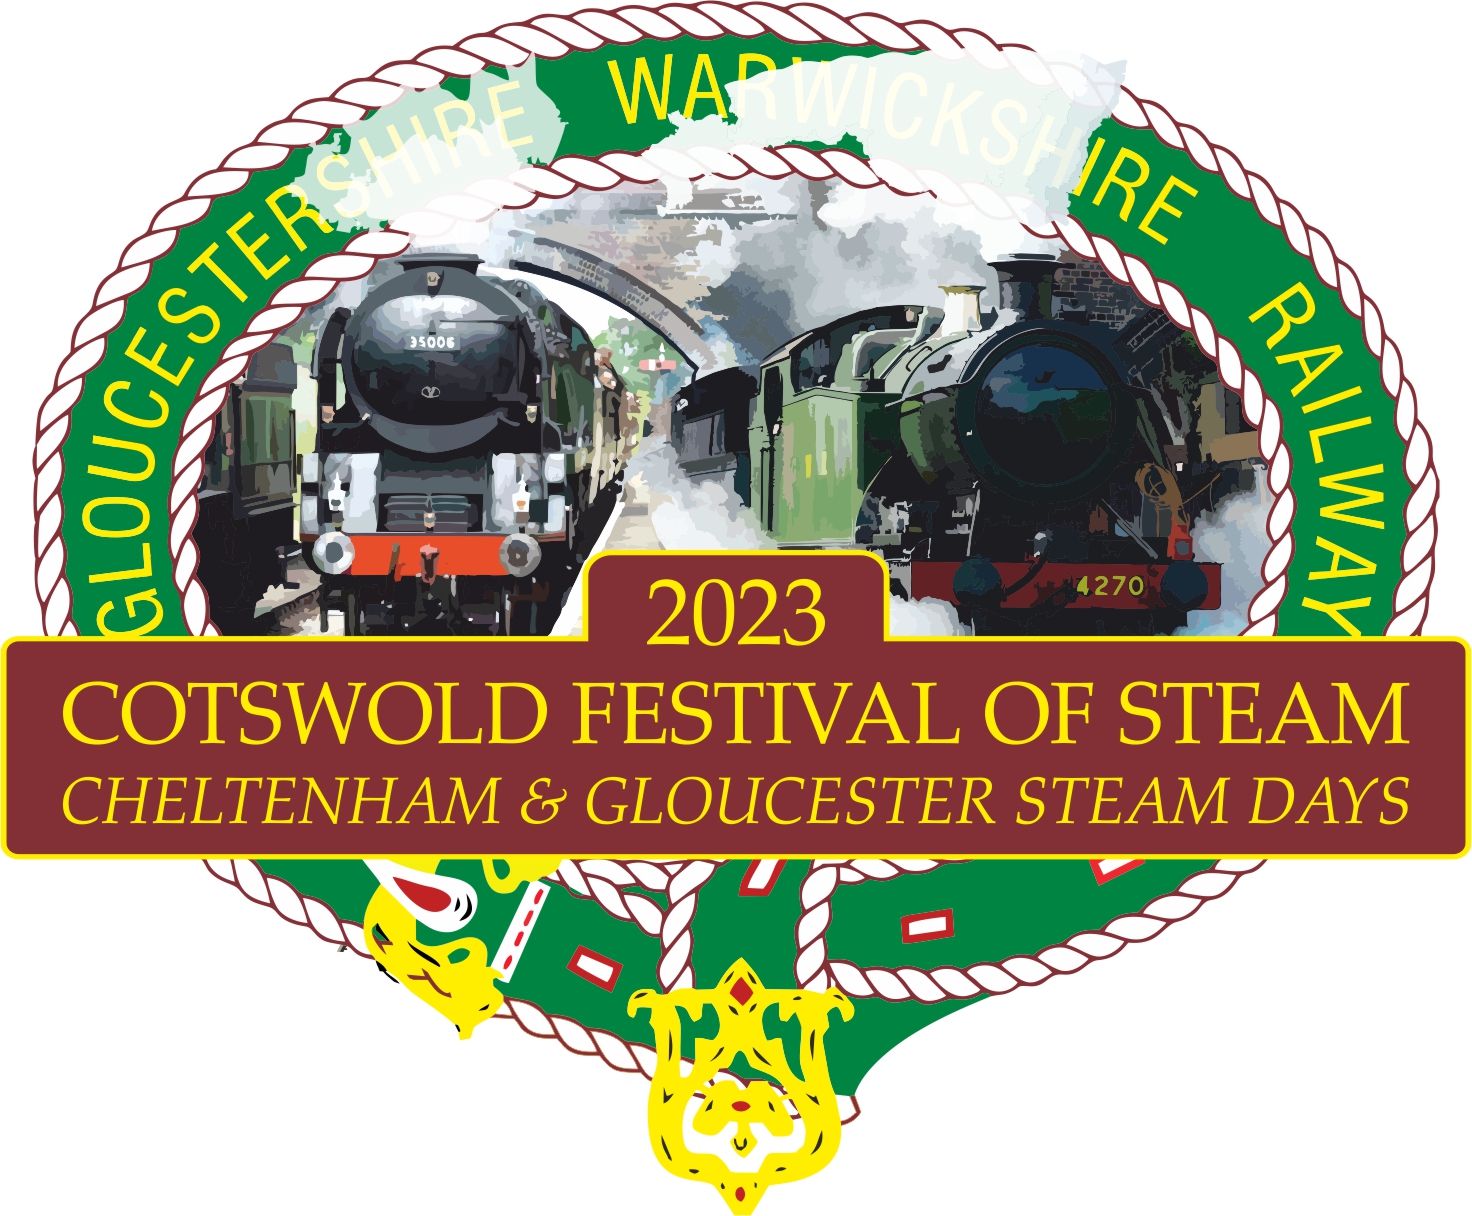 2023 Cotswold Festival of Steam Raring2go!